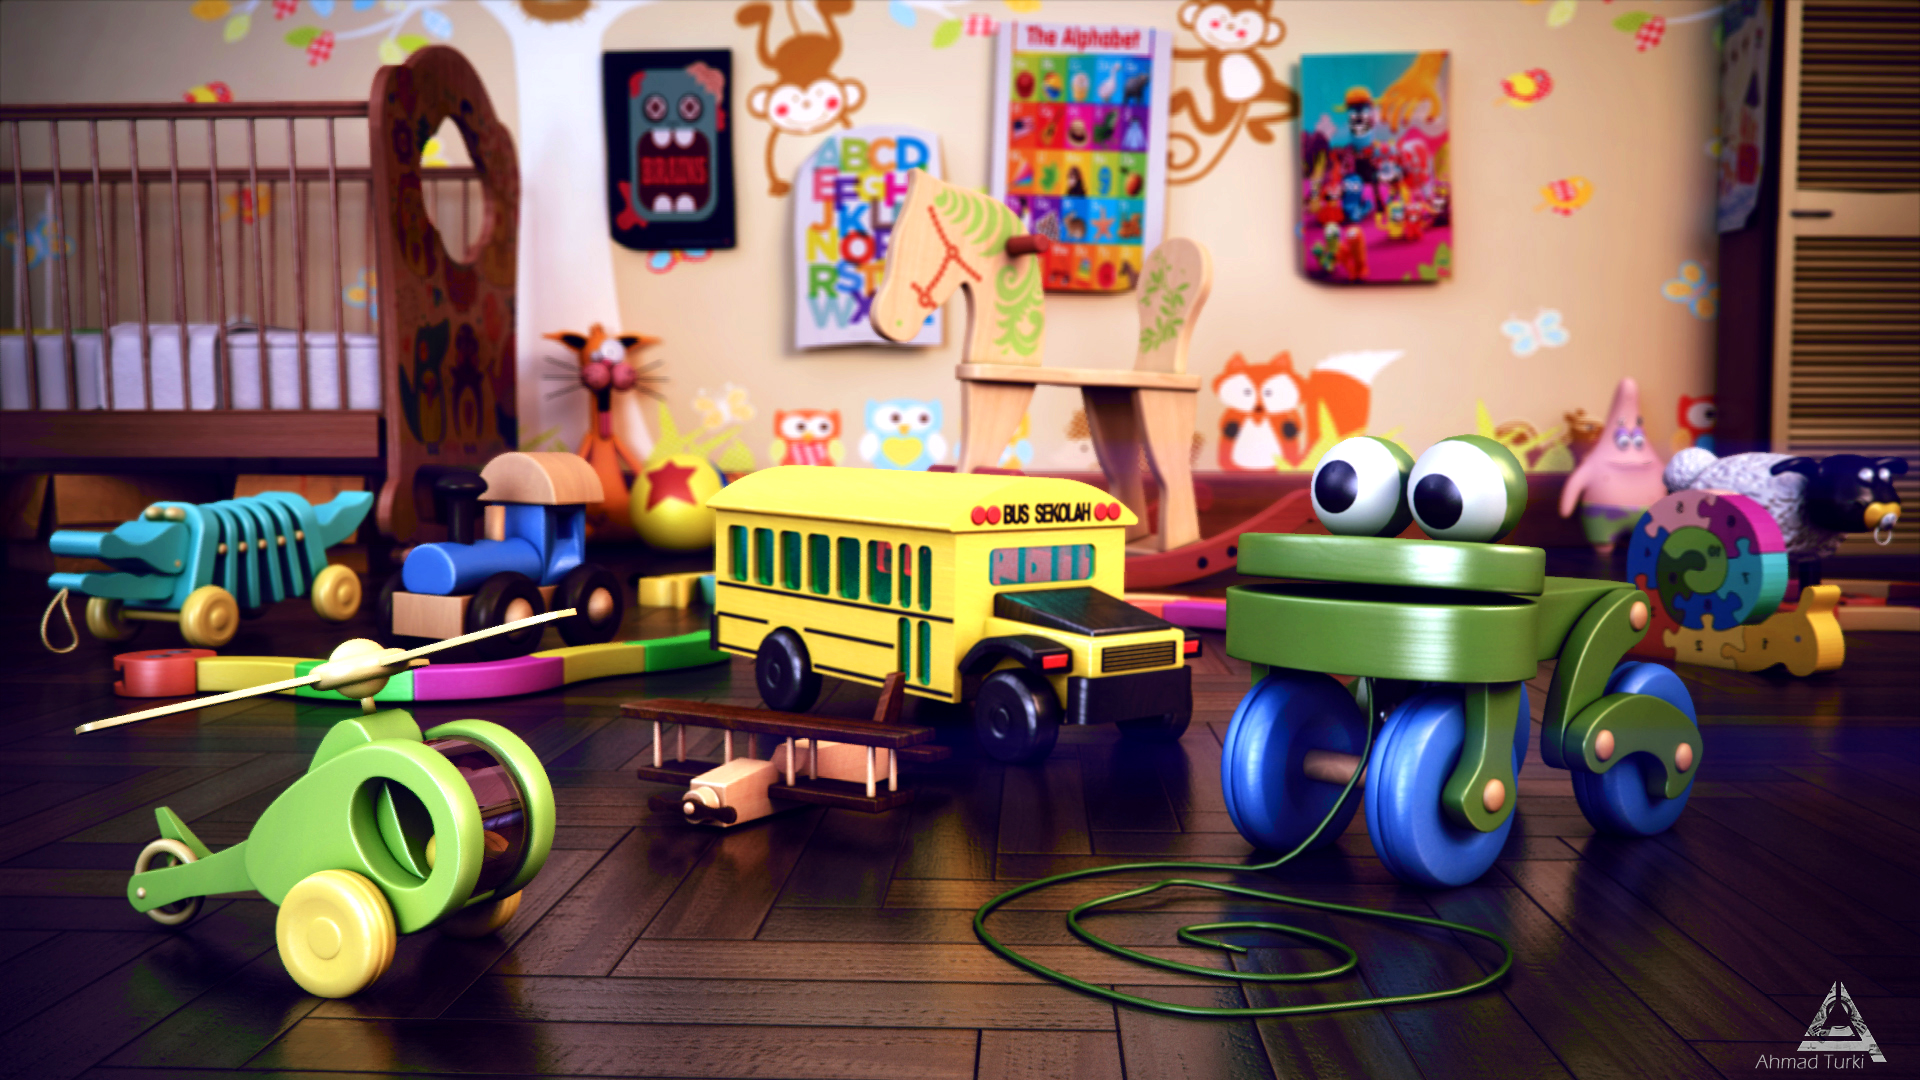 General 1920x1080 toys interior room colorful floor Patrick Star buses